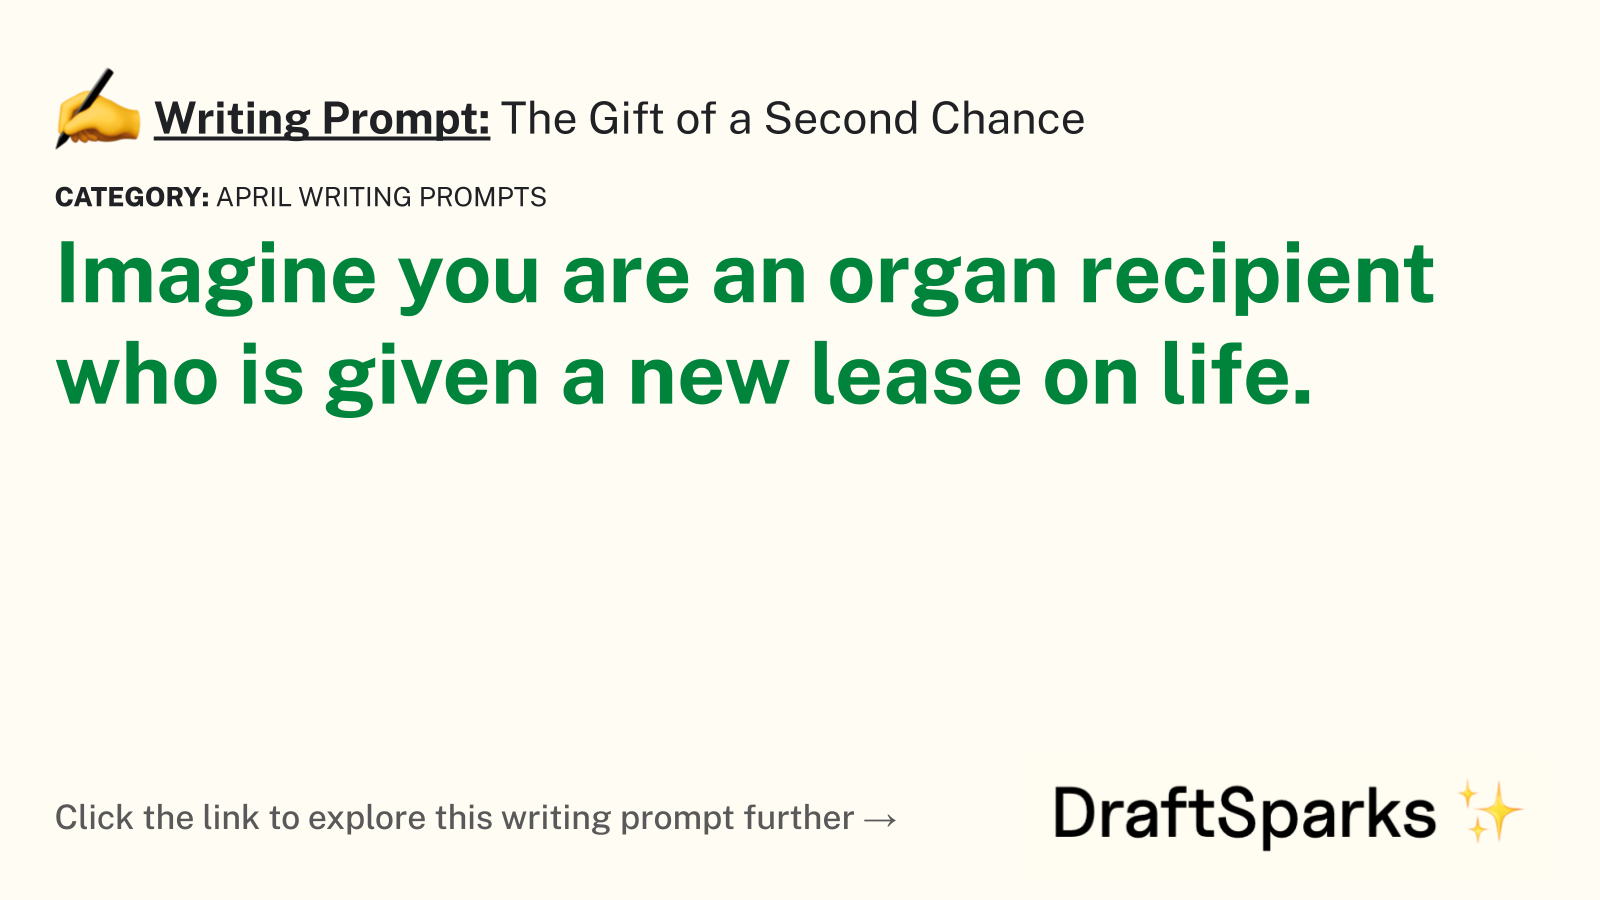 The Gift of a Second Chance